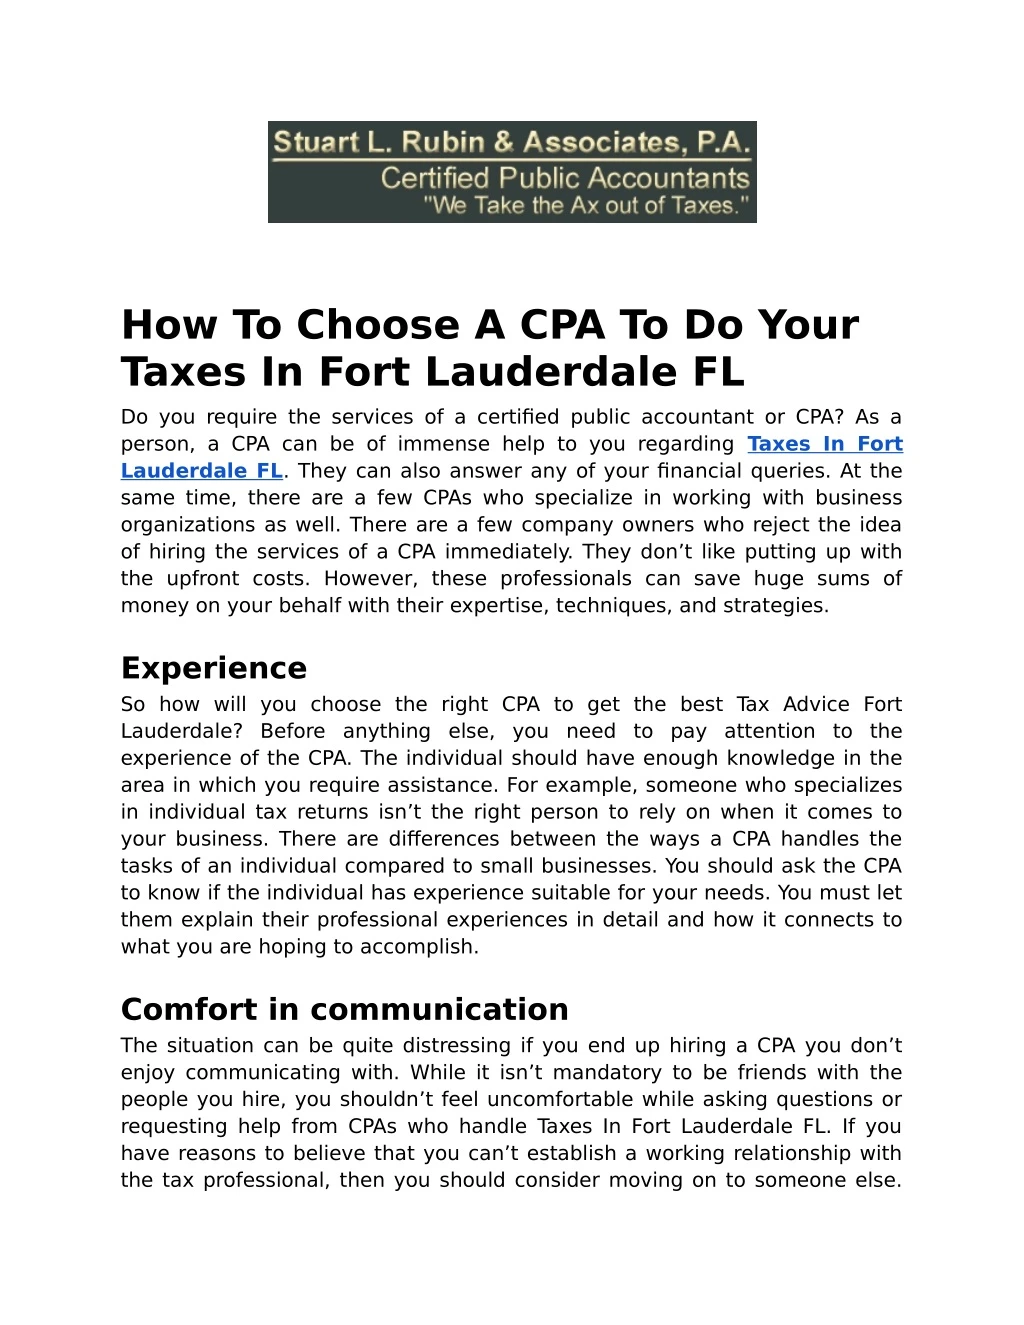 how to choose a cpa to do your taxes in fort